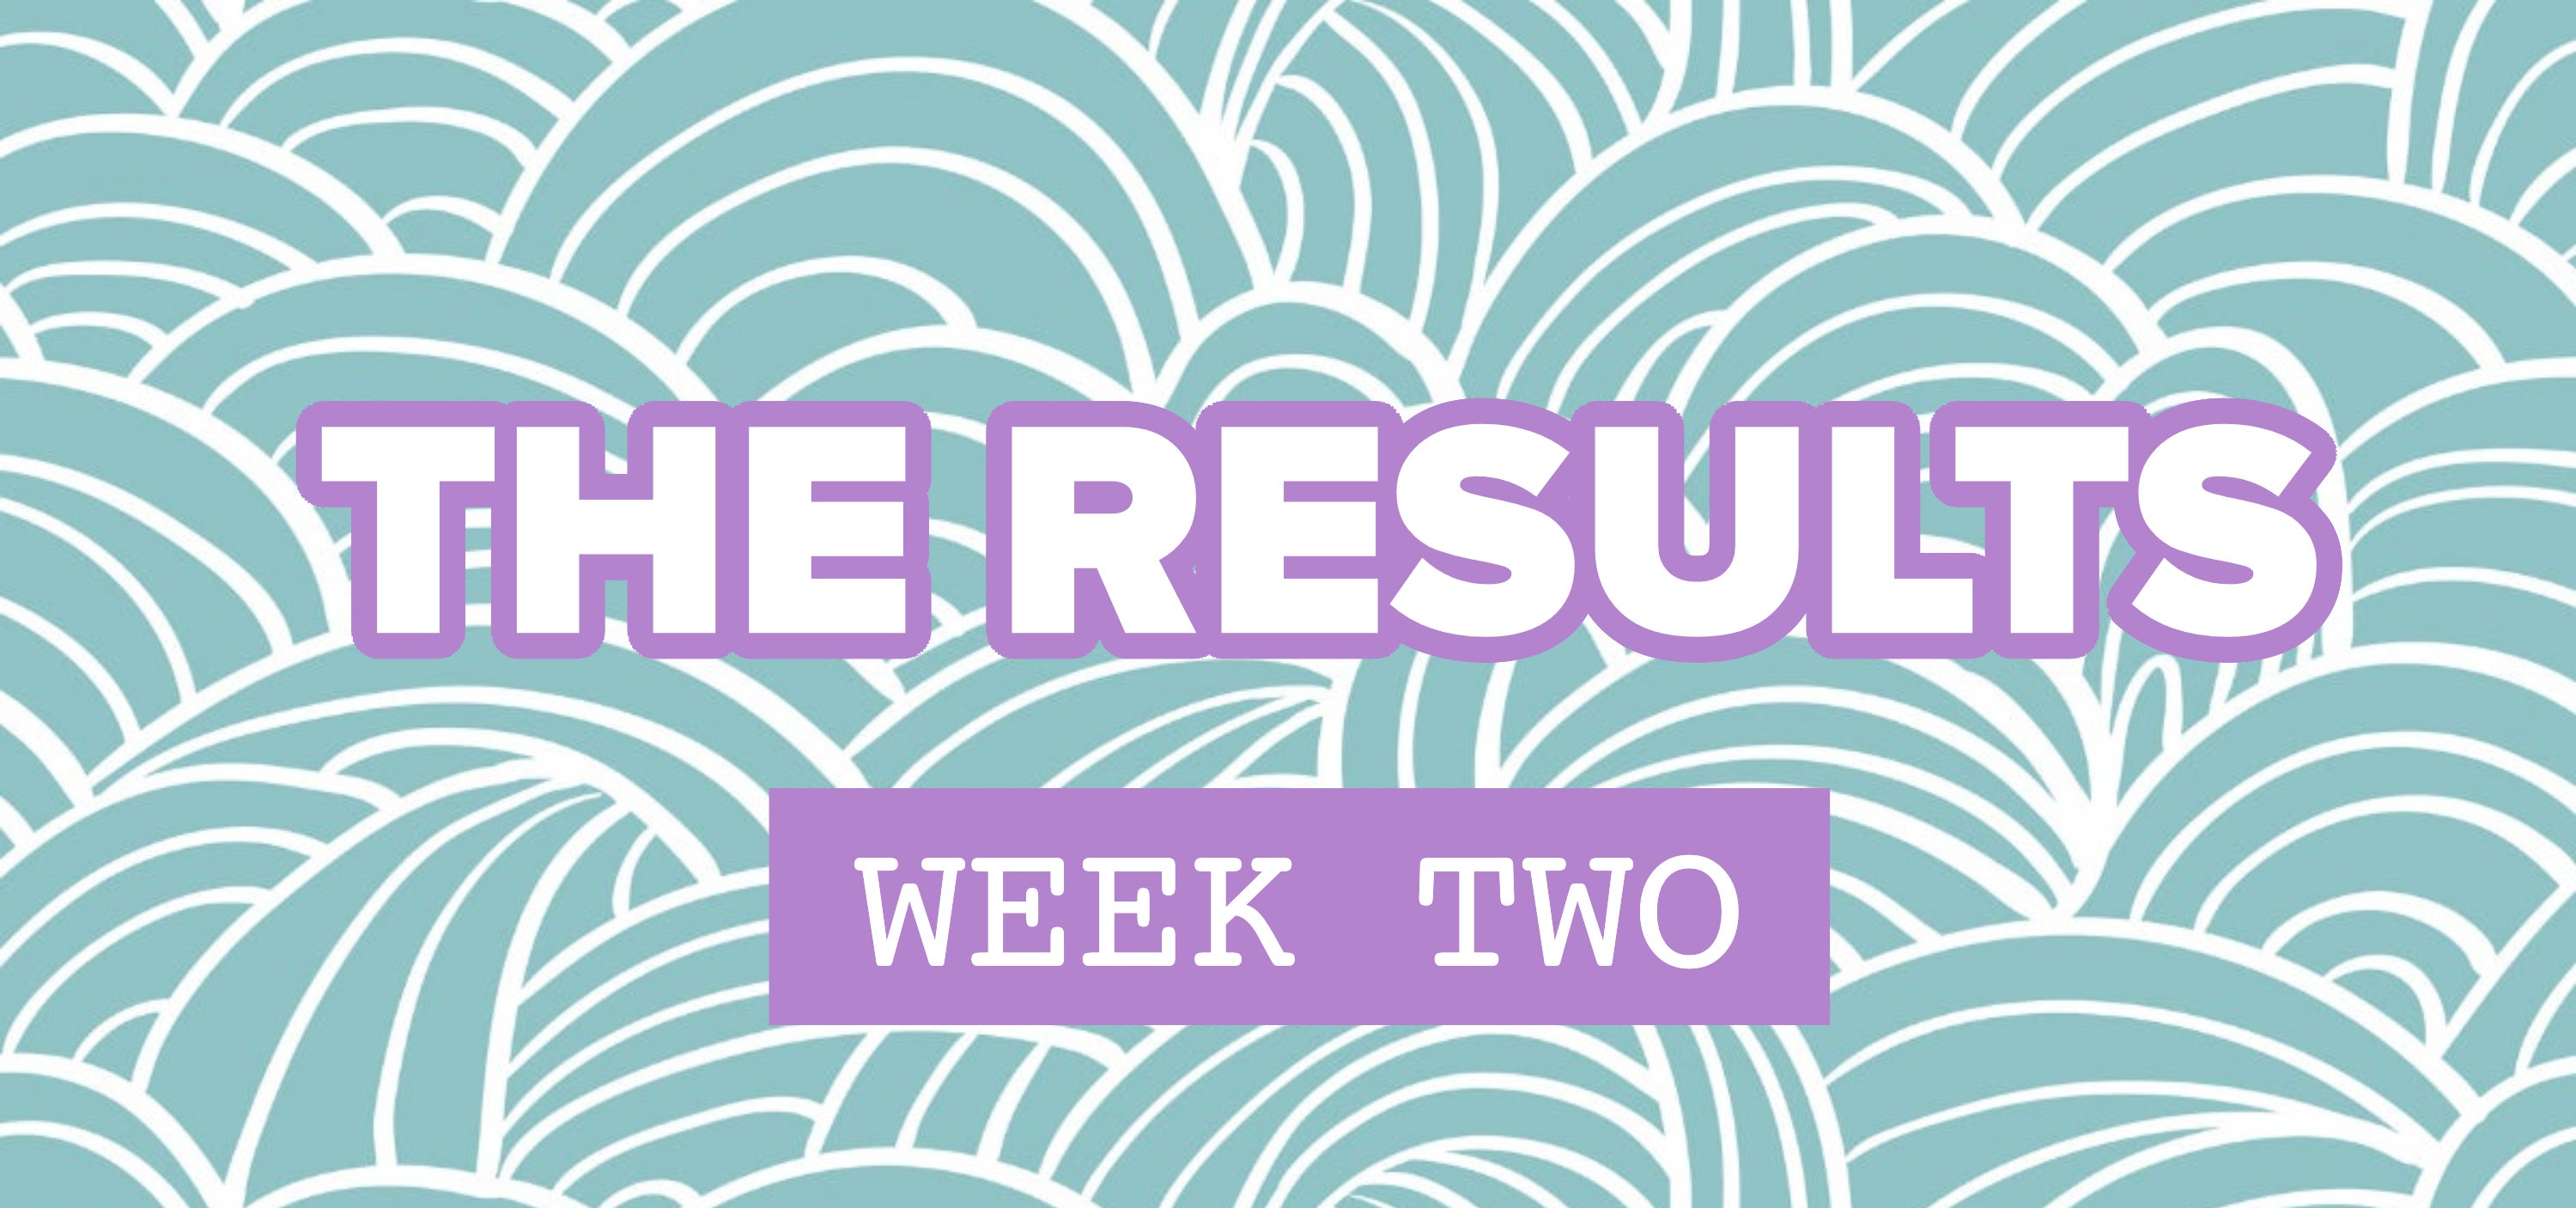 Text: &quot;THE RESULTS, week two&quot; over a decorative background